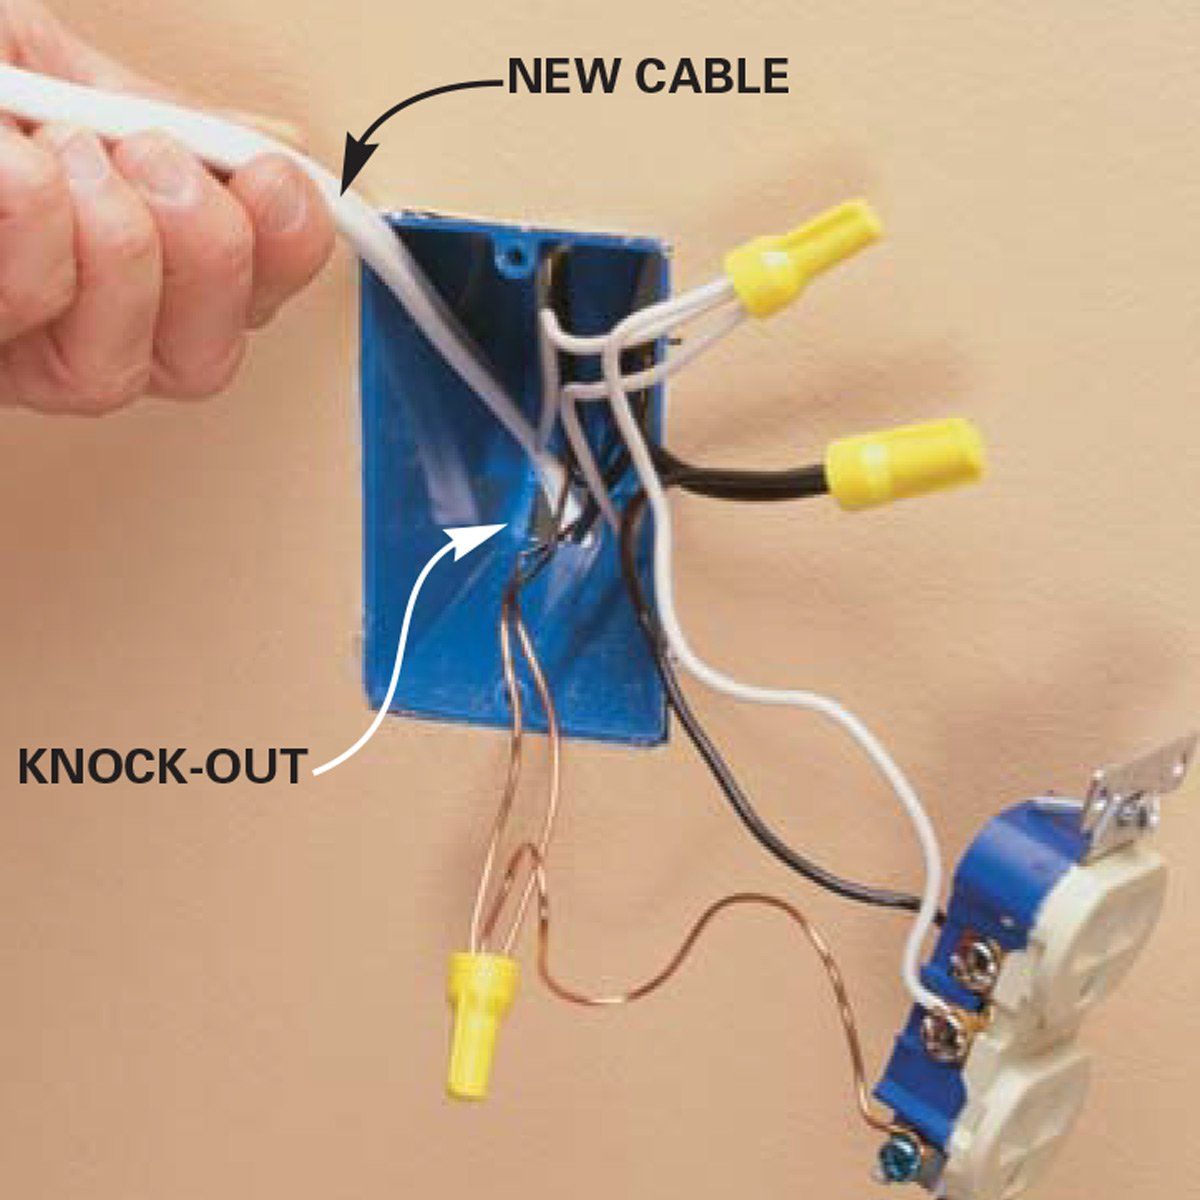 Adding an electrical outlet from a switch